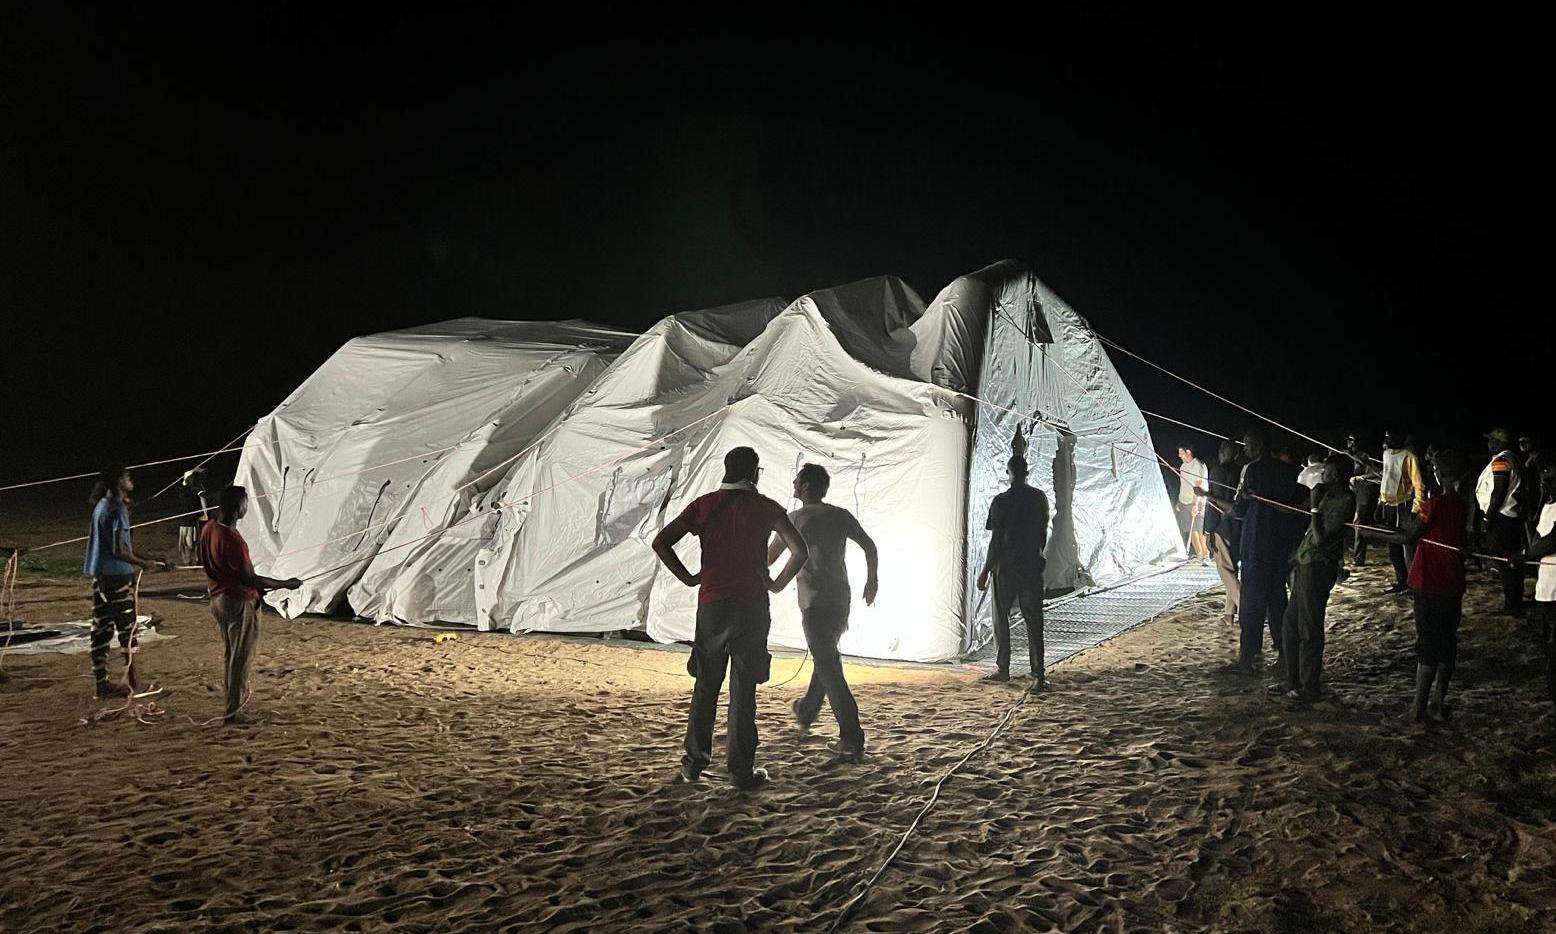 MSF aid workers with an inflatable tent hospital lit up in the night in Chad